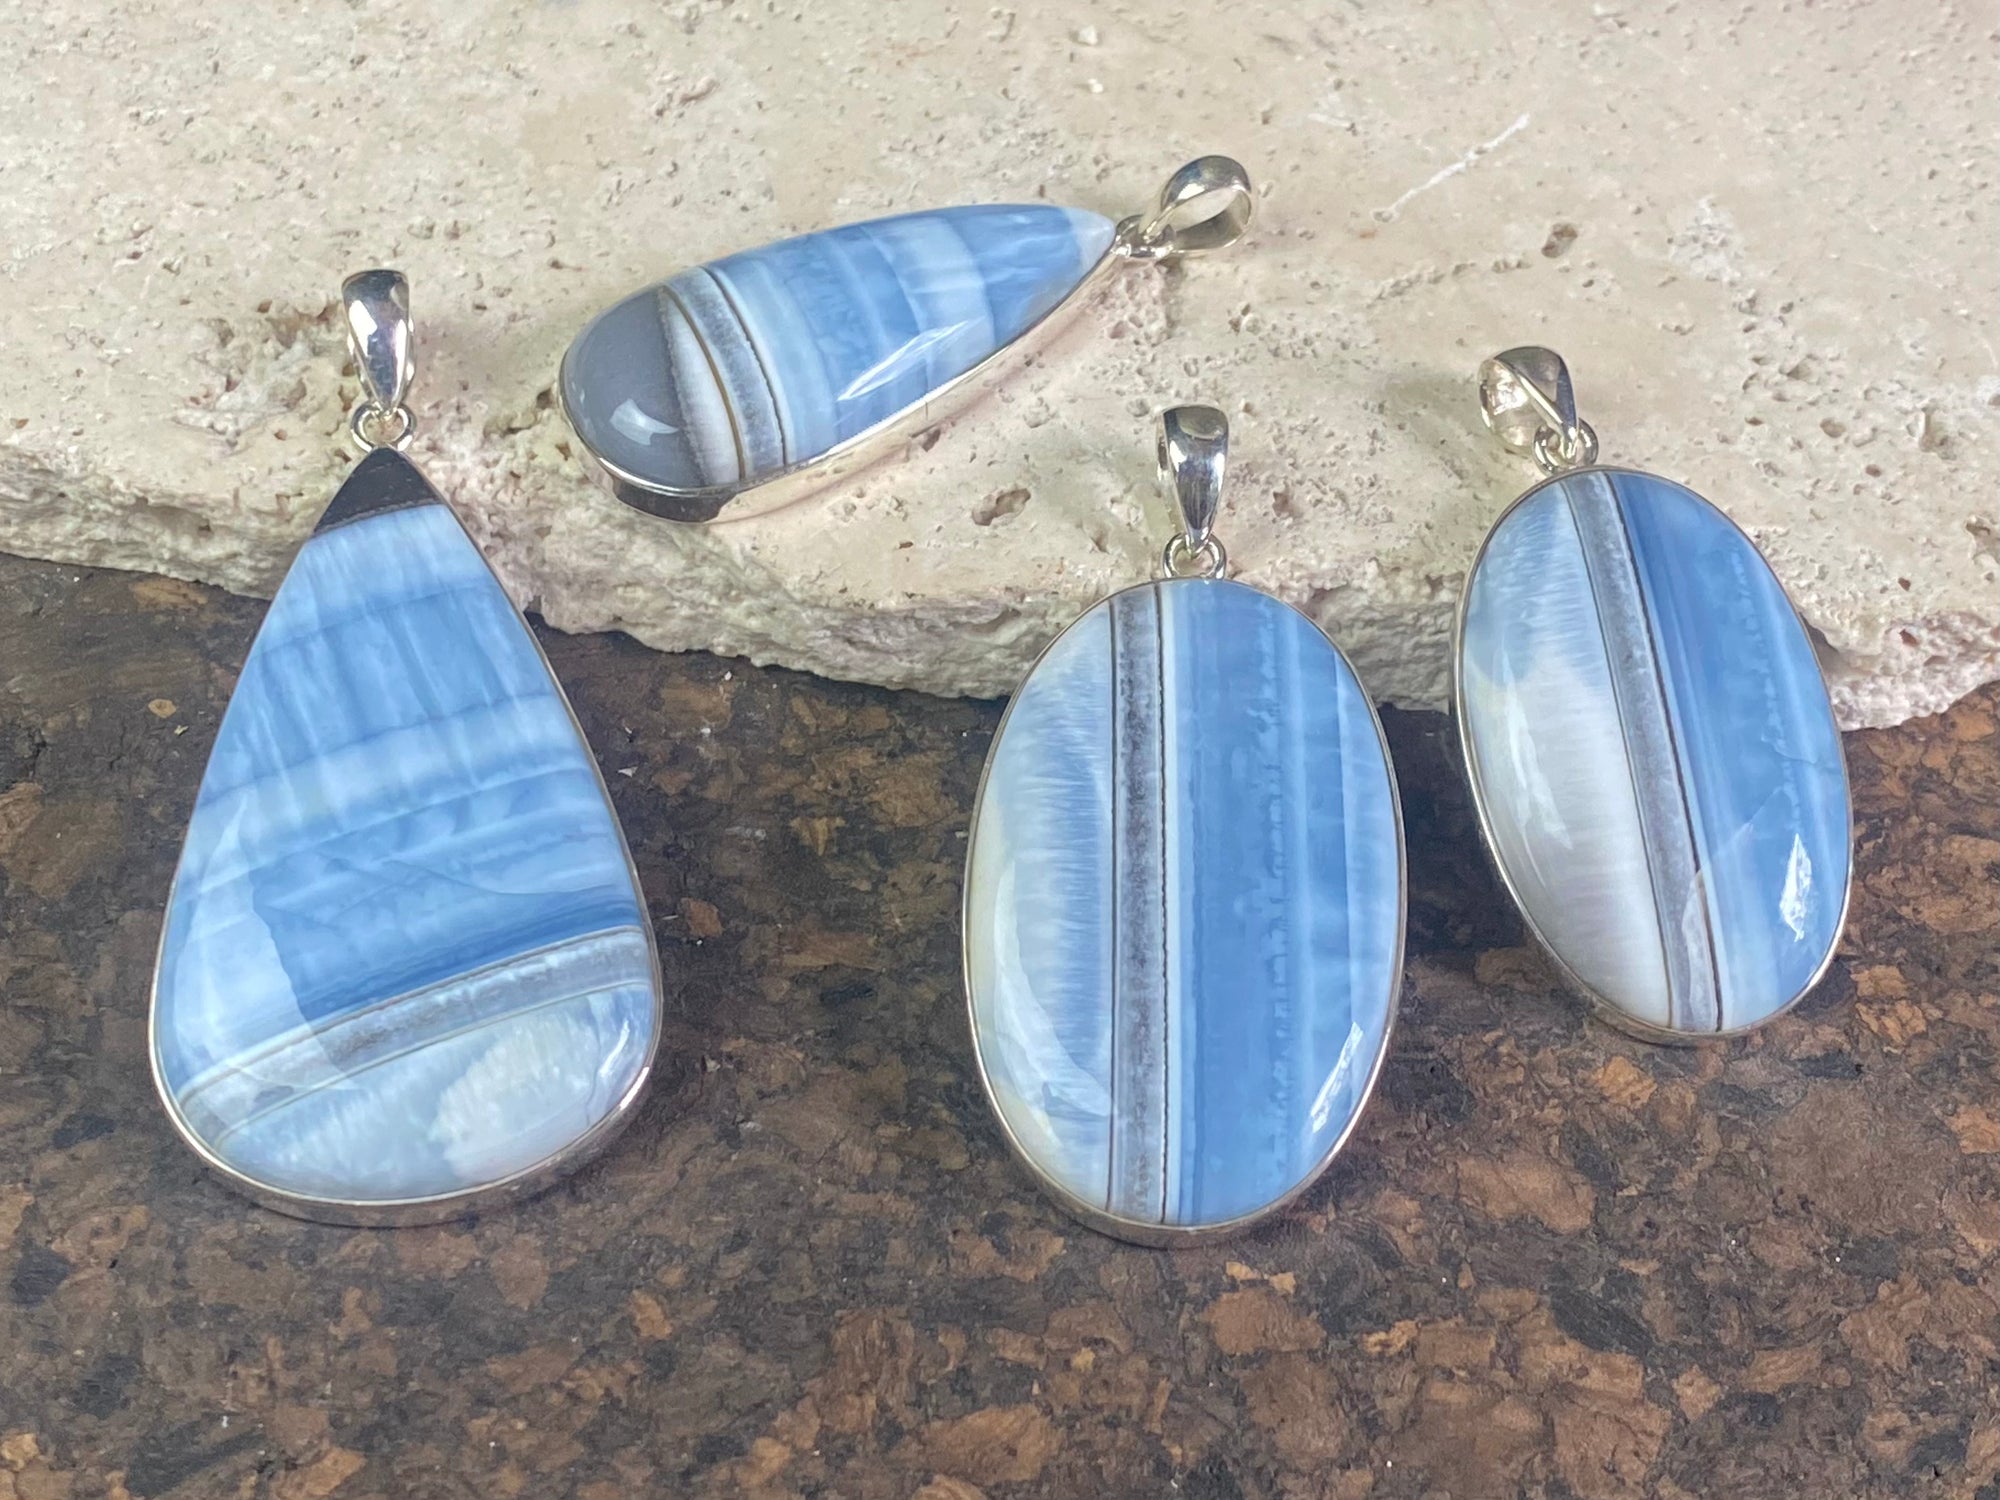 Natural banded blue opal pendants. Set off by sterling silver bezels, topped by generous sized bails large enough to accommodate a thick chain or cord. If you're looking for something a little bit different, this is statement jewellery at its finest.